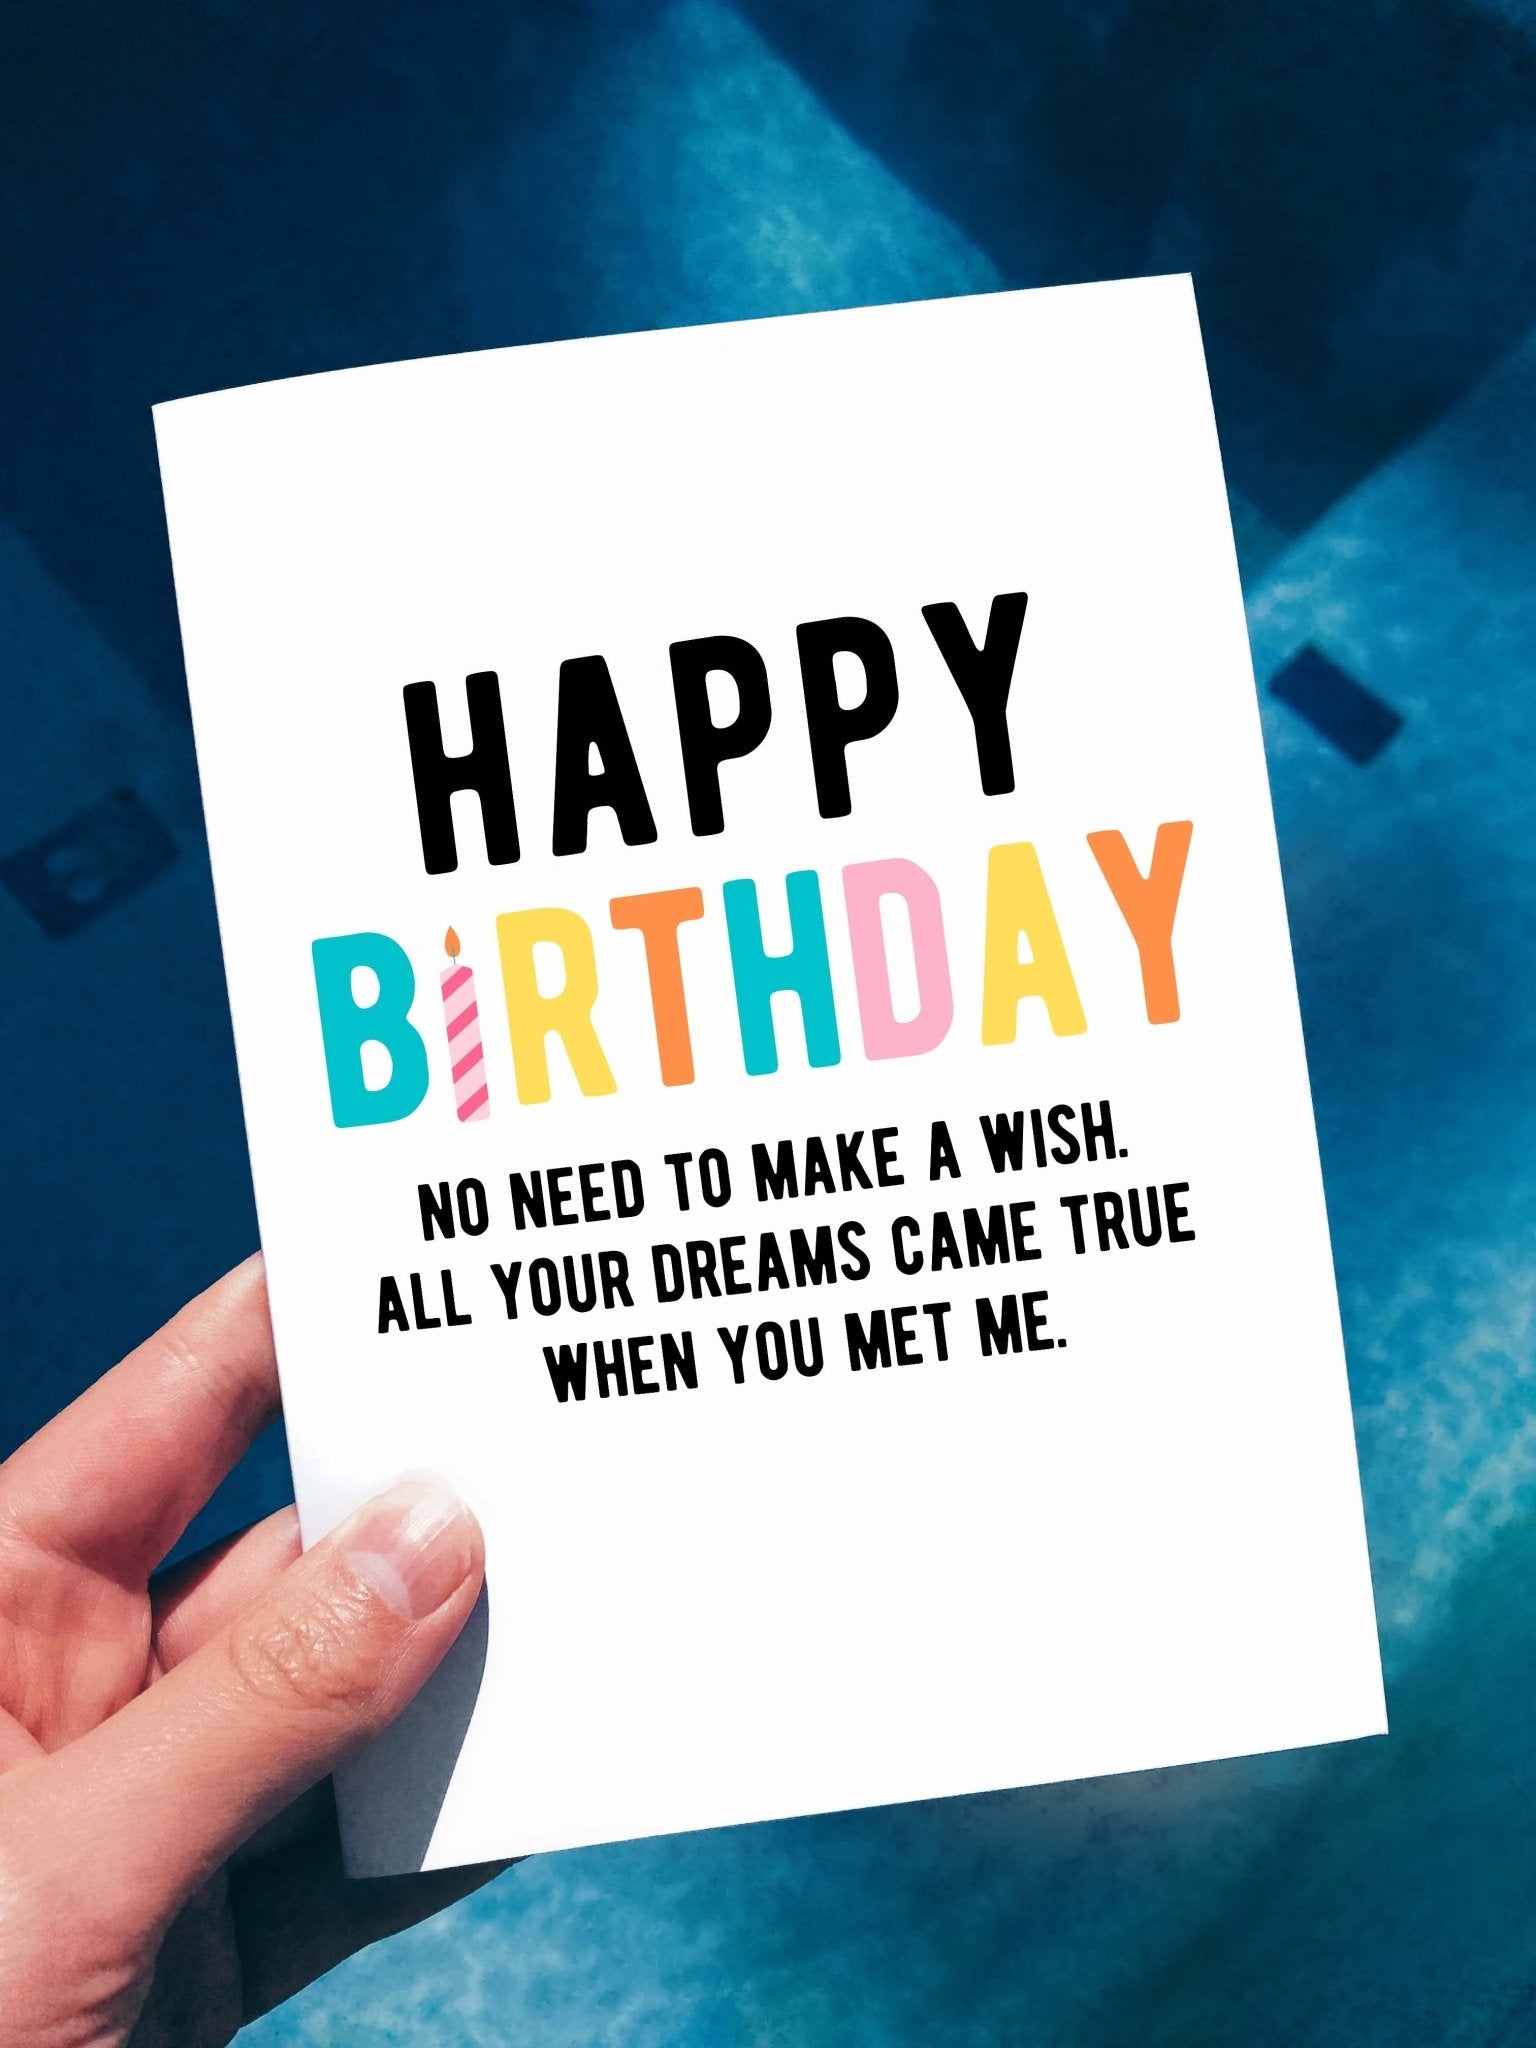 What to Write in a Birthday Card - Unique Happy Birthday Wishes